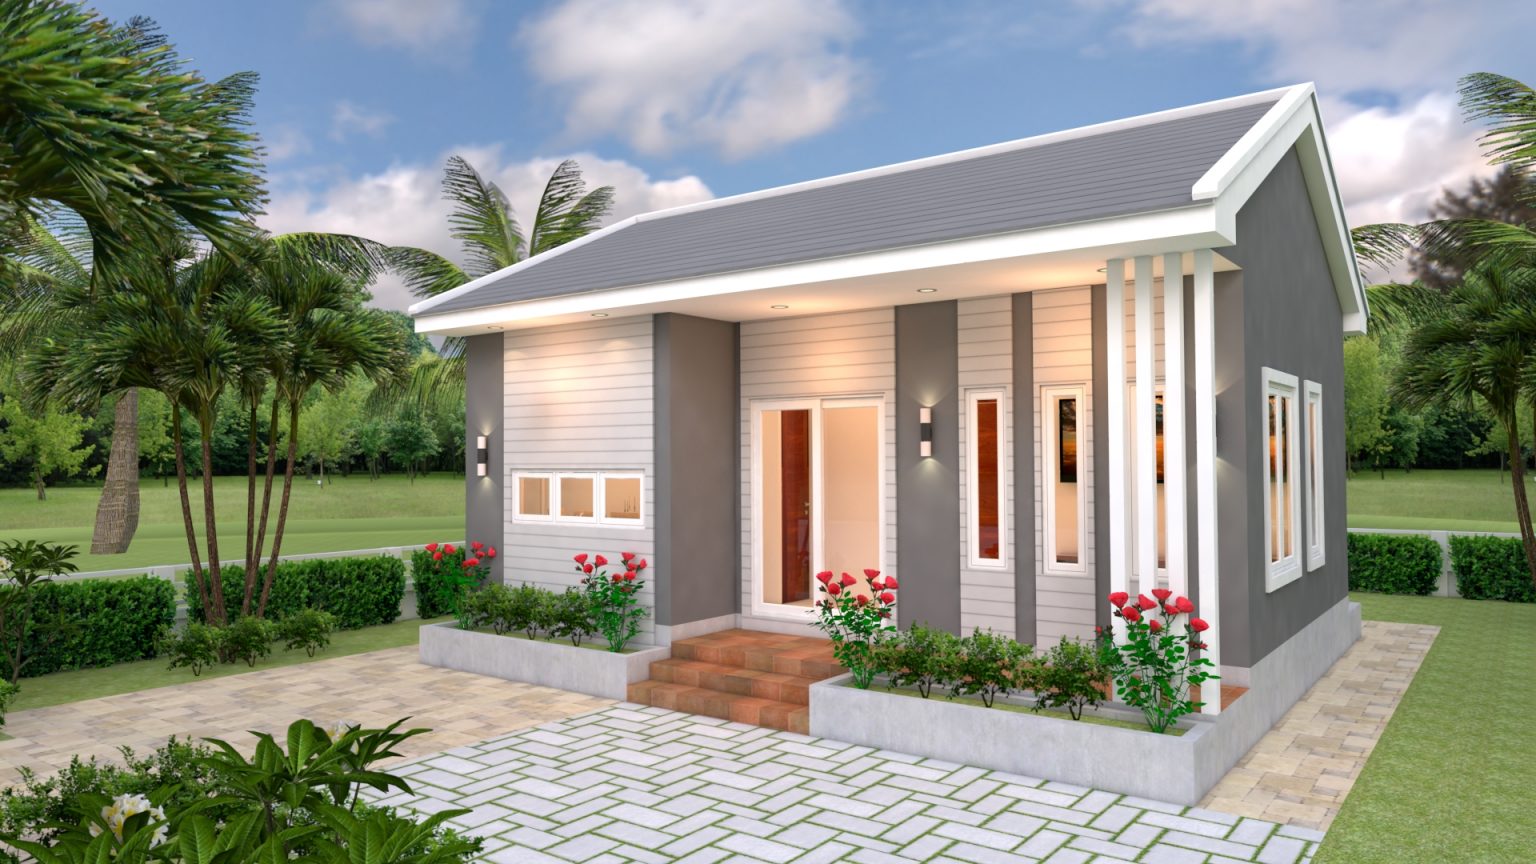 Small 2 Bedroom House 8x6 Meter 26x20 Feet - Pro Home DecorZ